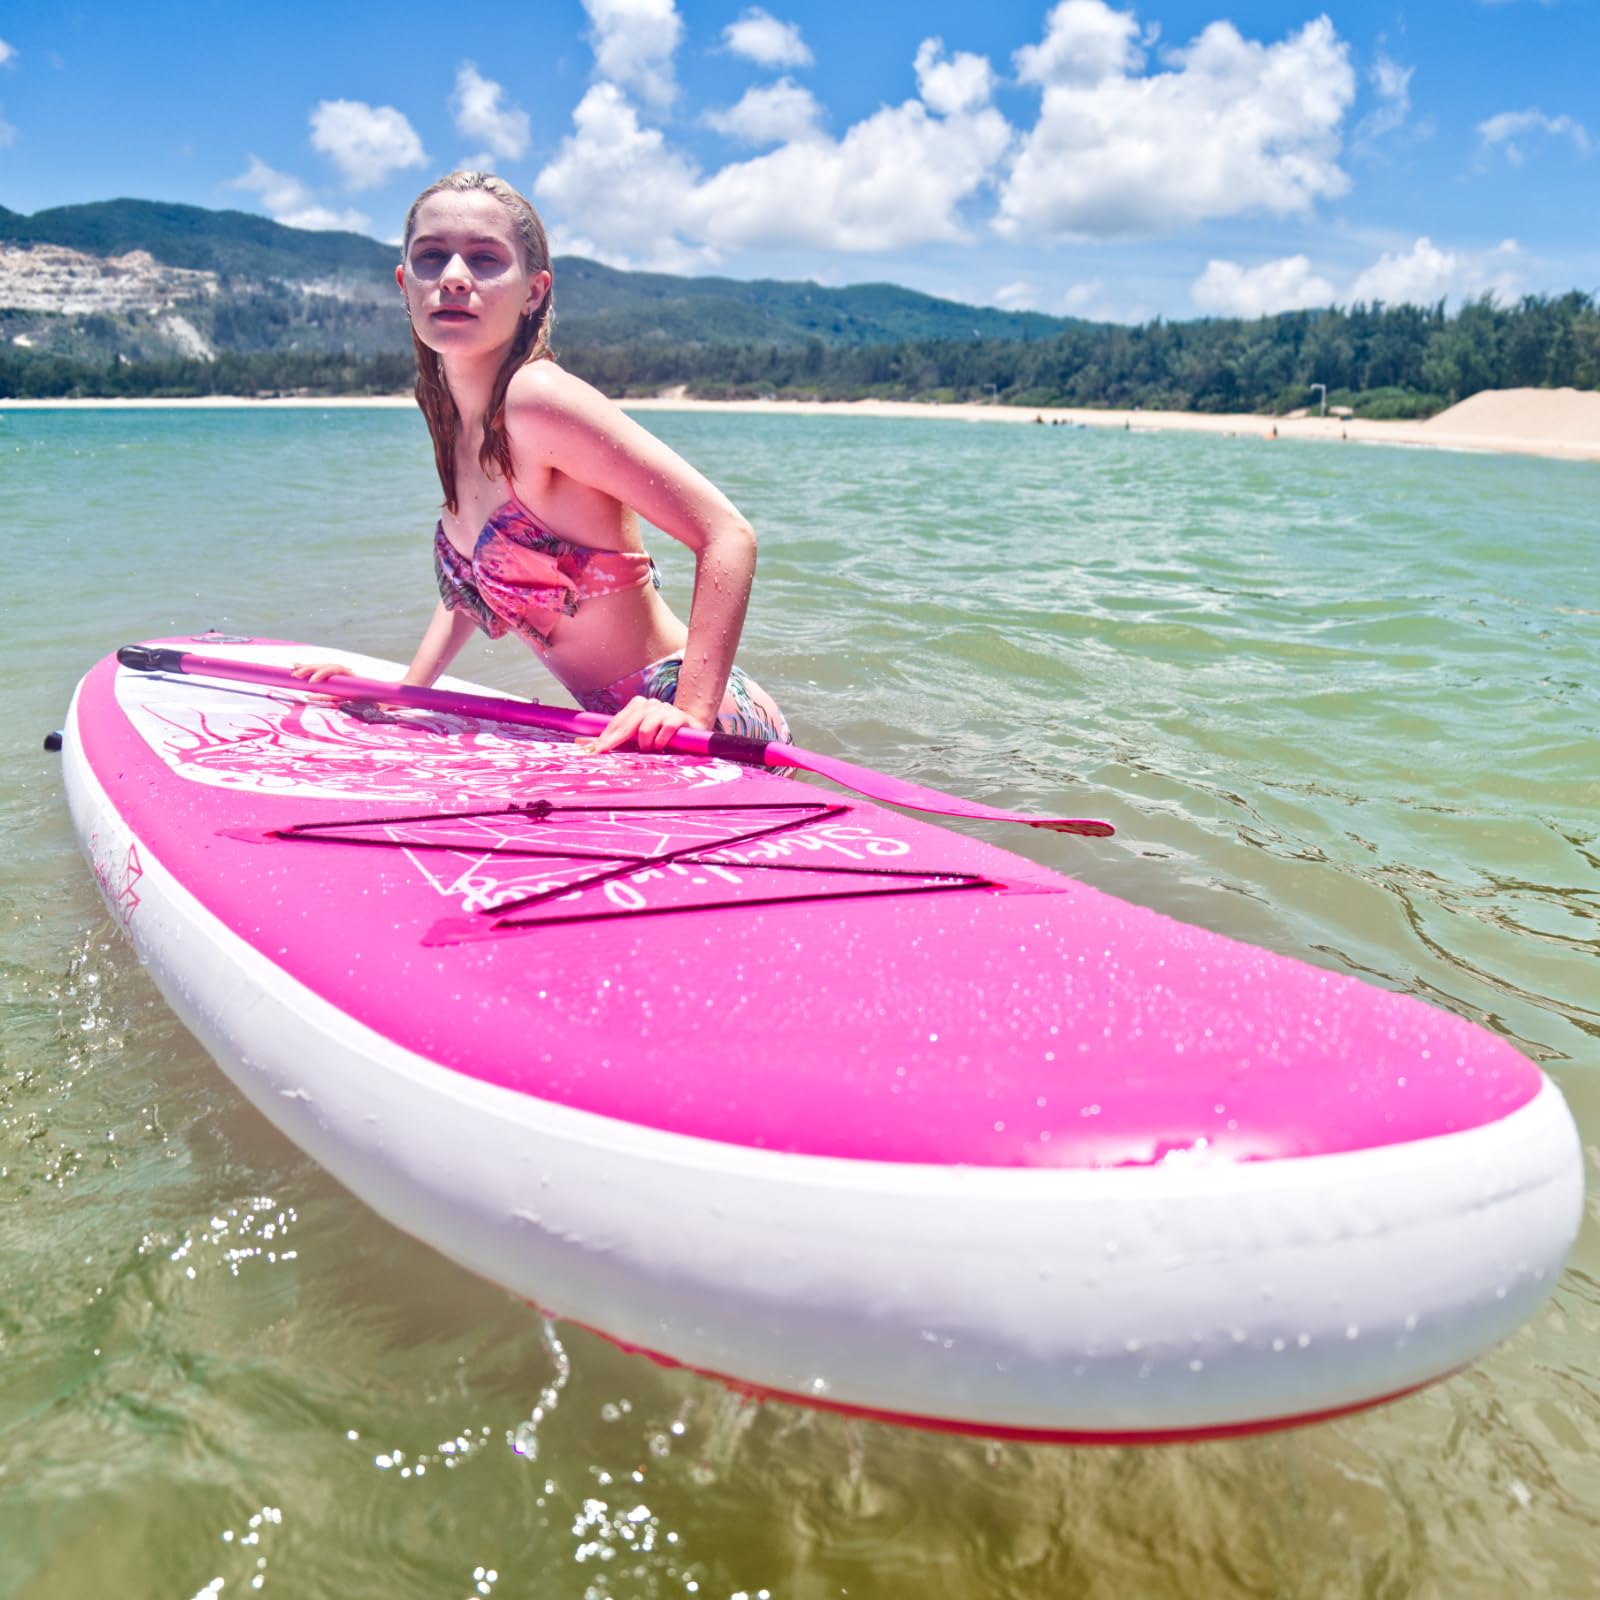 Shridinlay Inflatable Stand Up Paddle Board Surfing SUP Boards, 6 Inches Thick ISUP Boards with Backpack,Adjustable Paddle, Waterproof Bag,Leash,and Hand Pump for All Skill Levels (Pink)